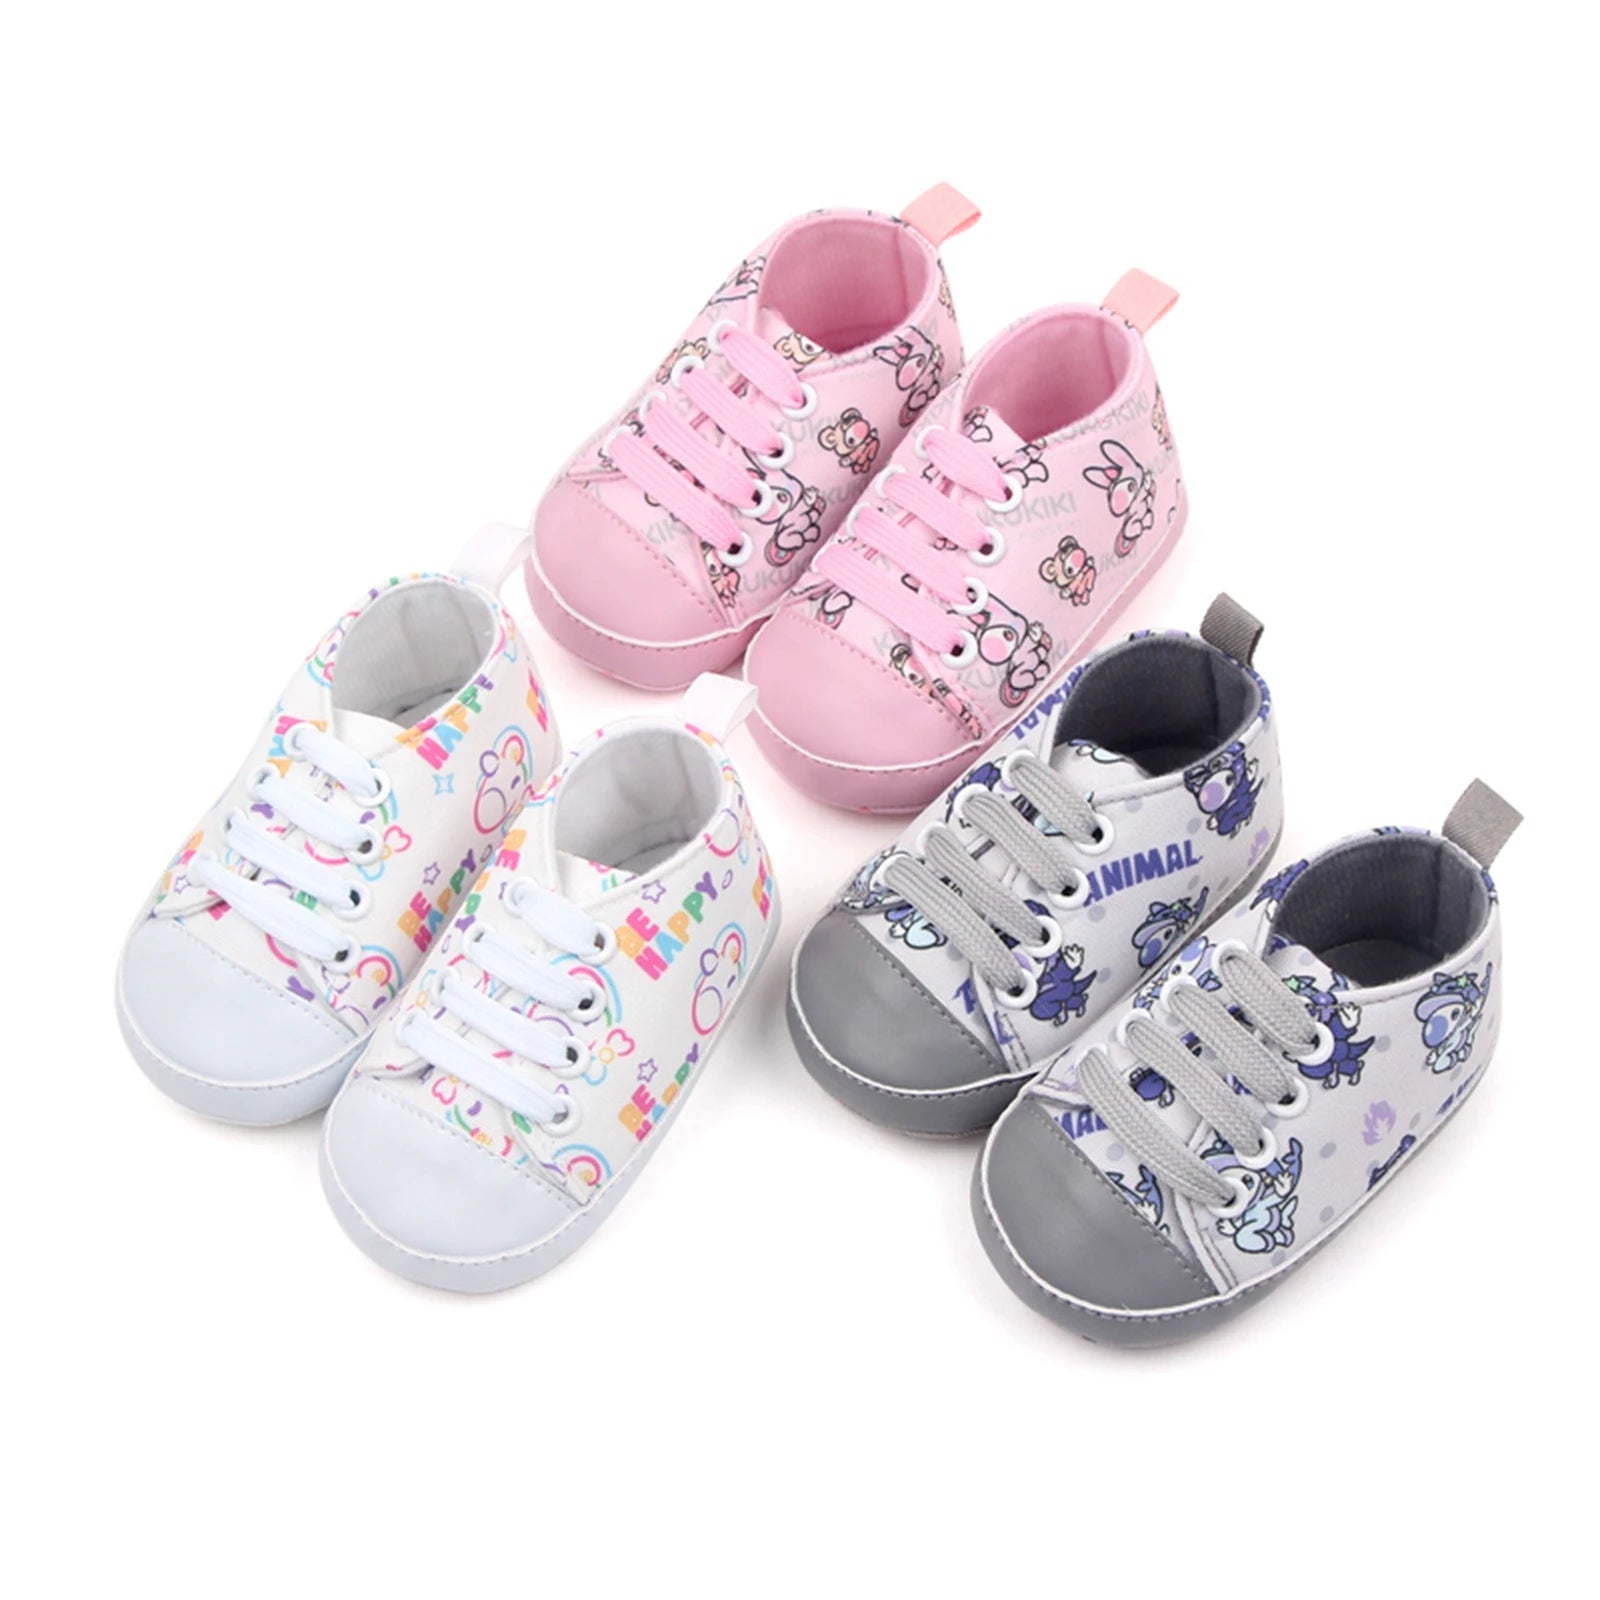 Baby Boys Girls Crib Shoes Cartoon Print Tie-Up Sneakers Non-Slip Infant First Walkers 0-18M